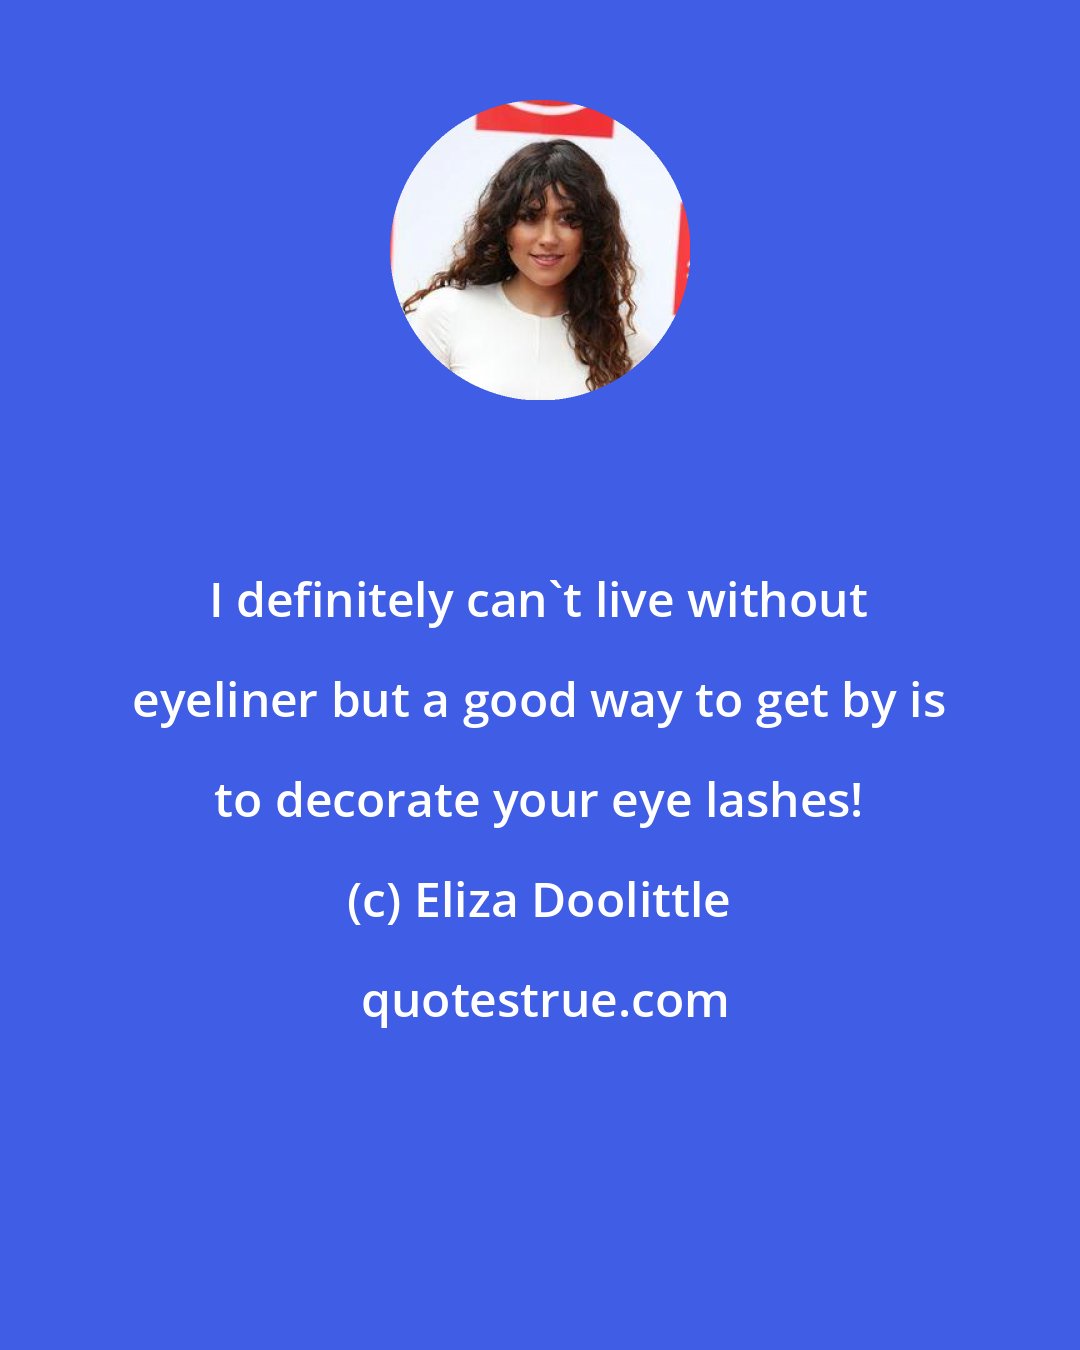 Eliza Doolittle: I definitely can't live without eyeliner but a good way to get by is to decorate your eye lashes!